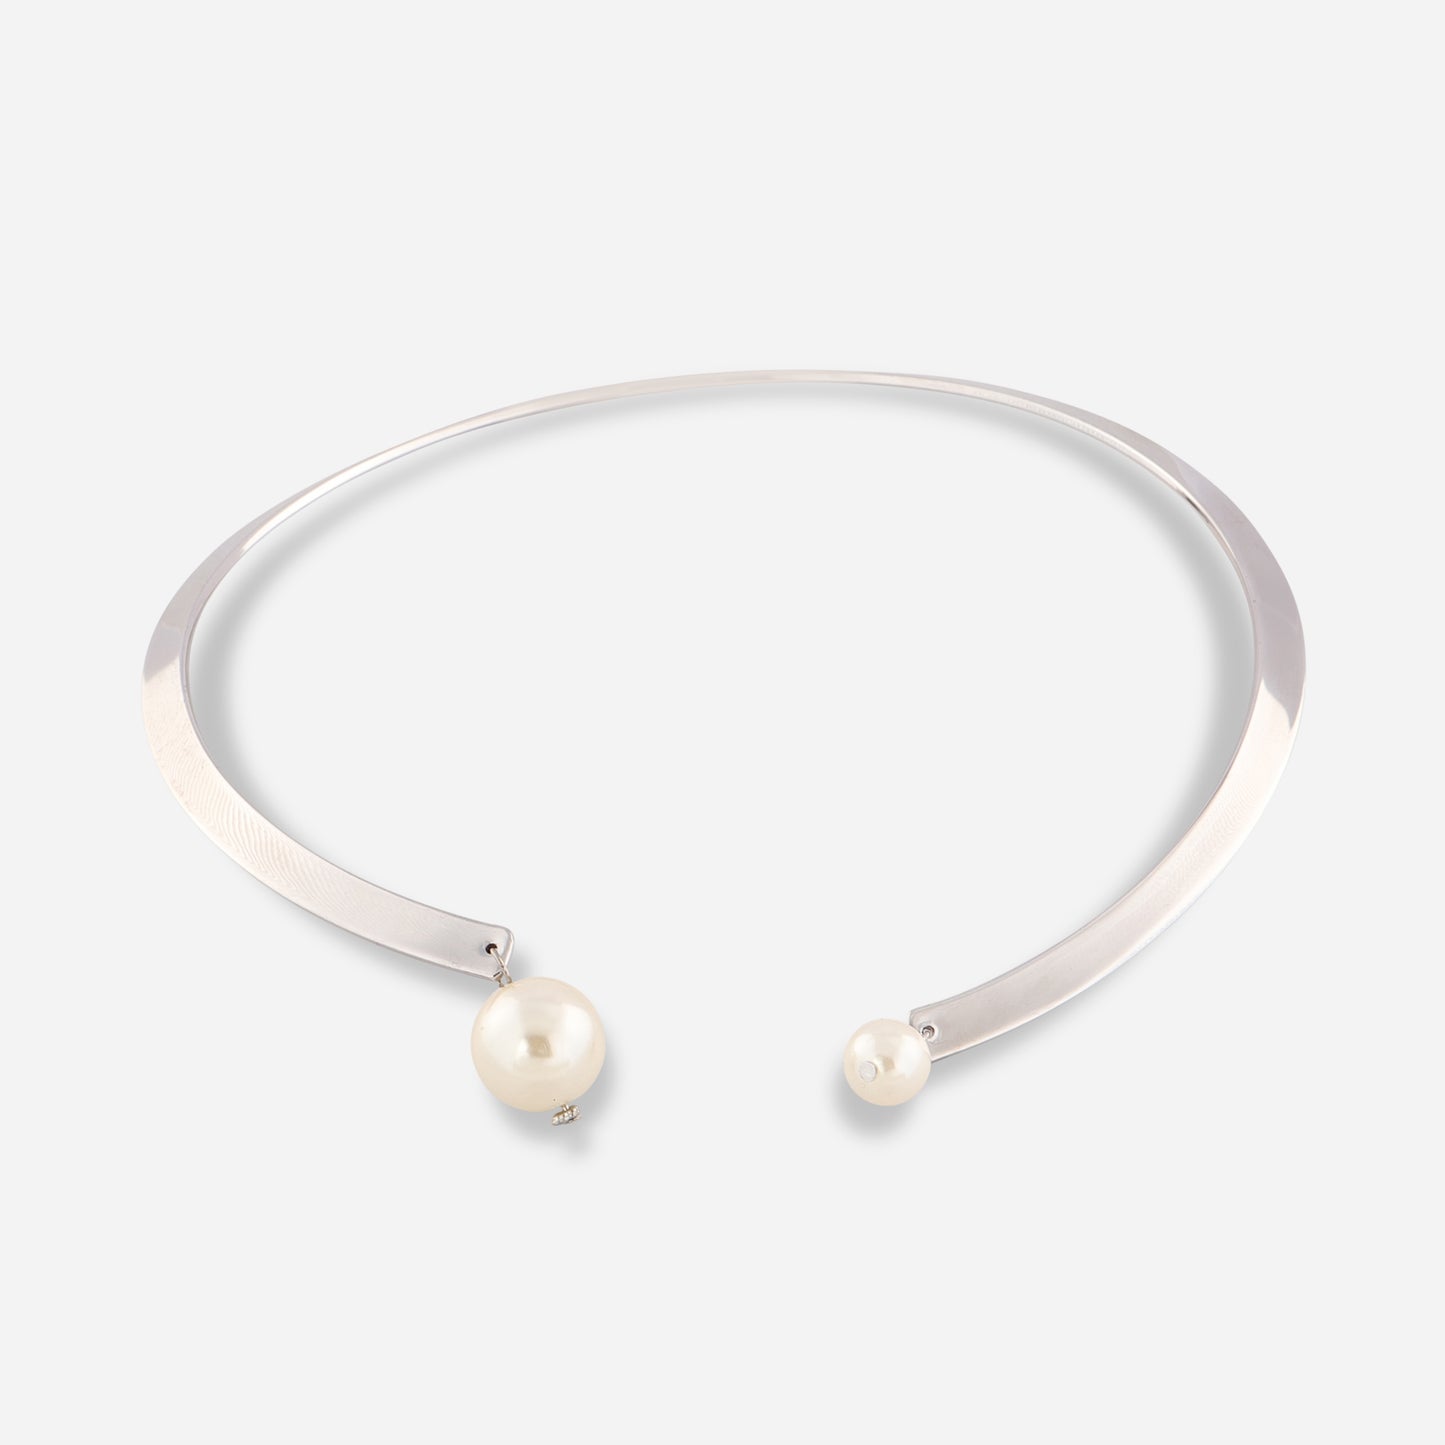 Silver Choker Necklace With Pearls